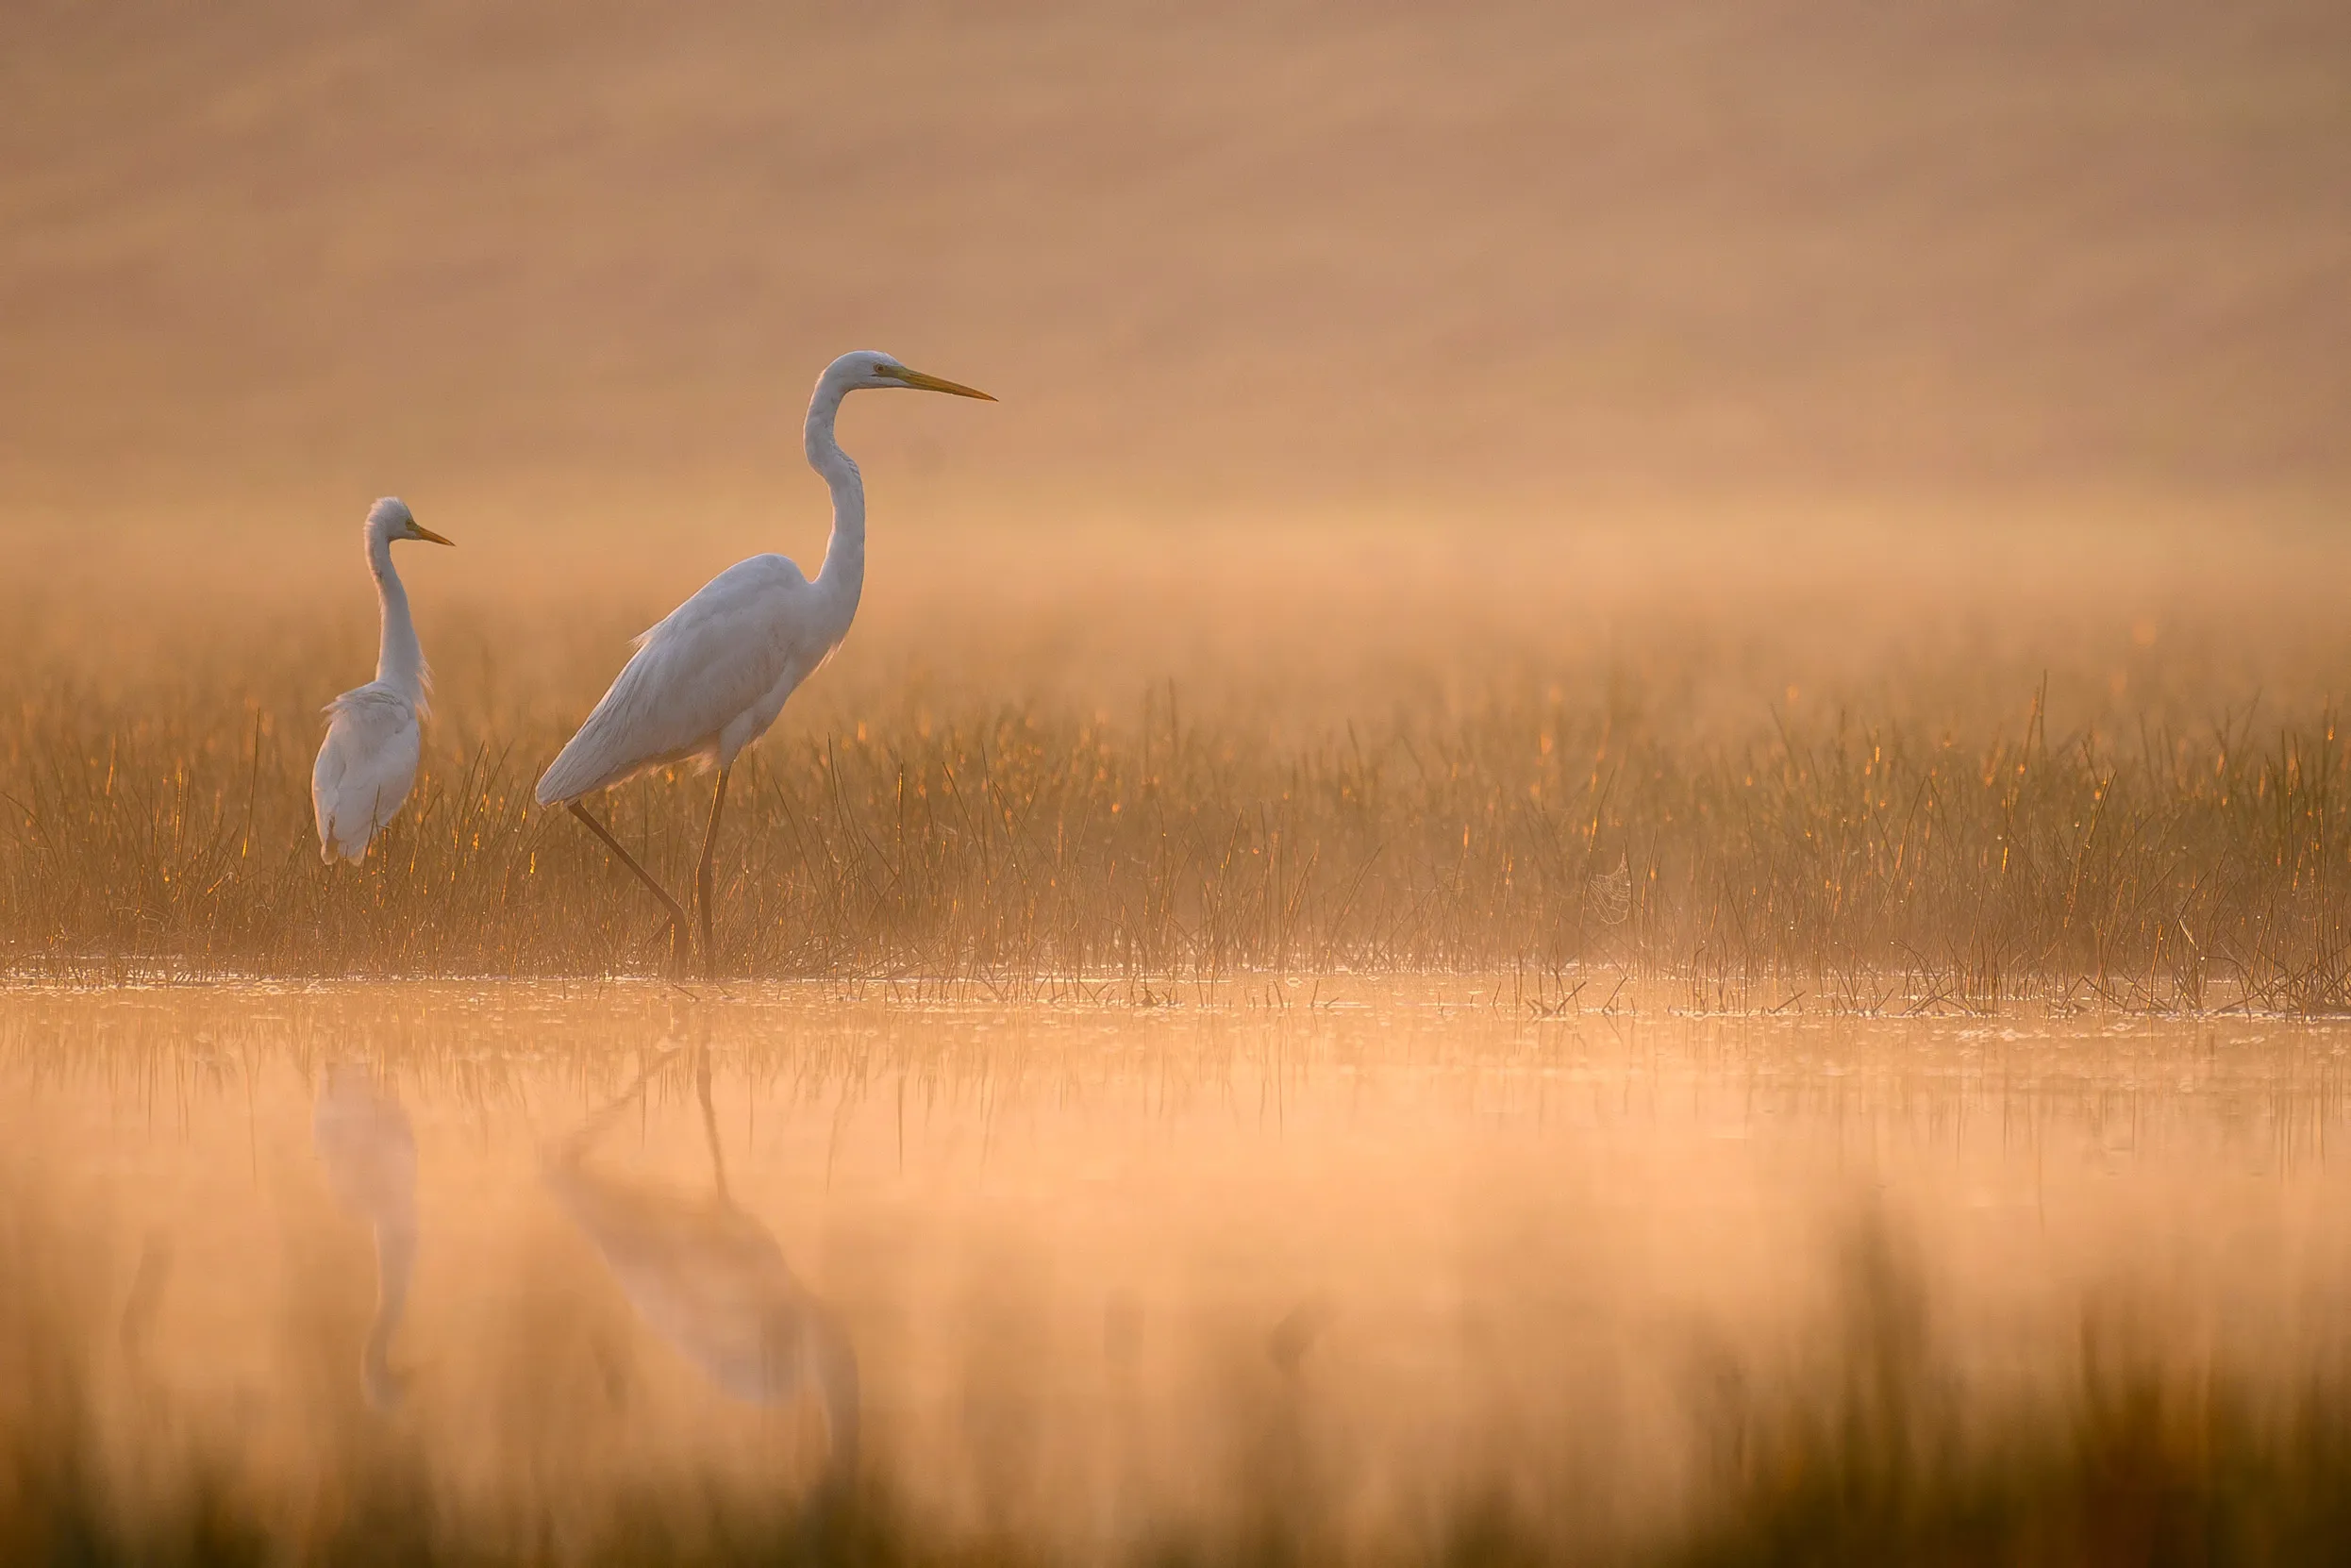 A pair of Great White Egrets standing in shallow water at sunrise.